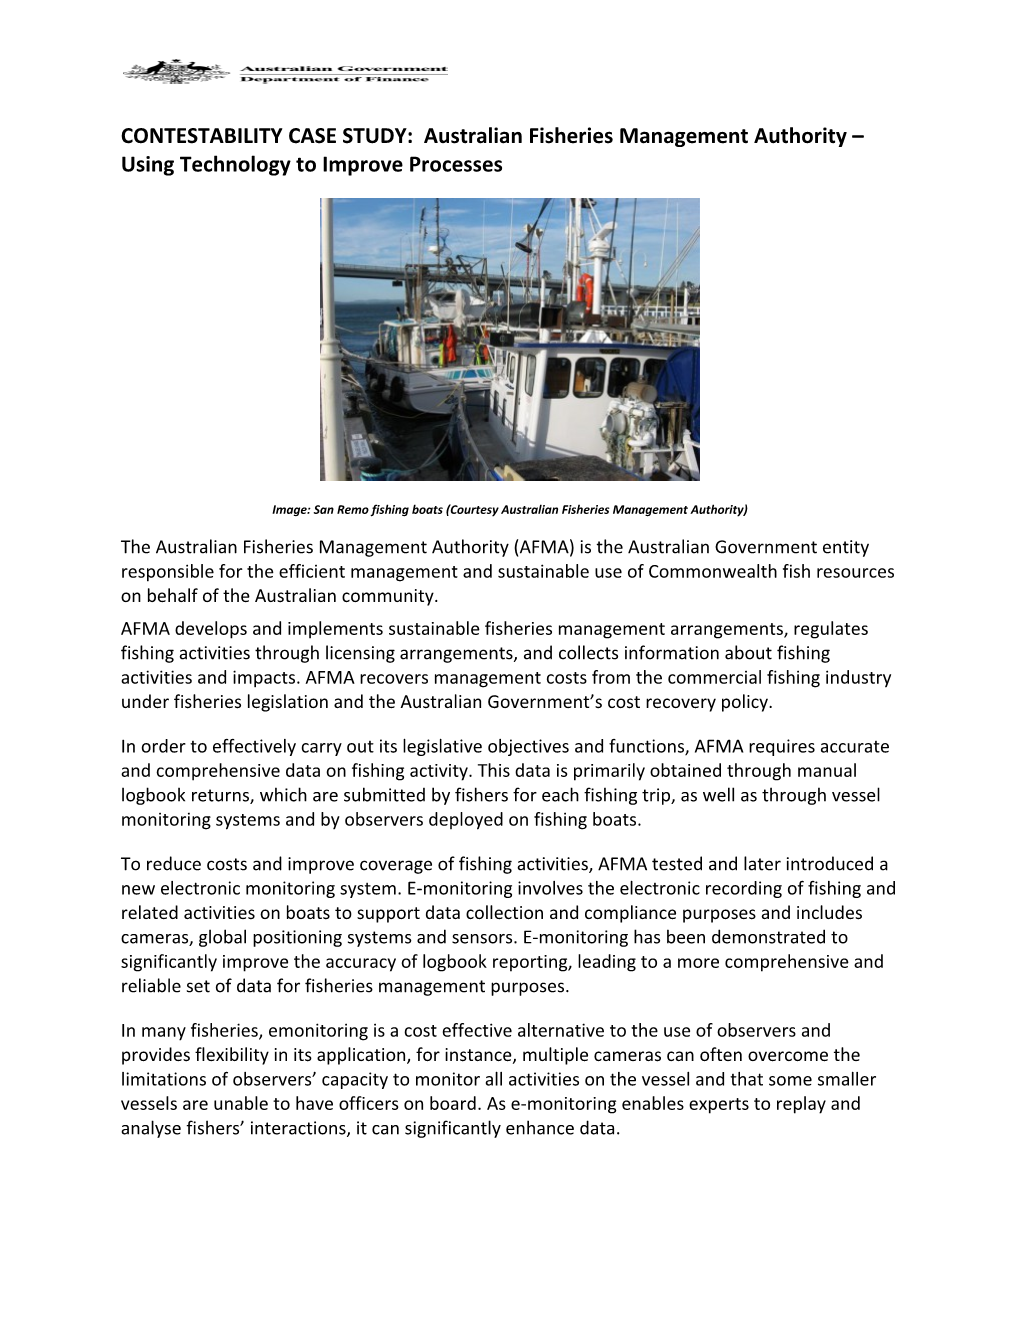 CONTESTABILITY CASE STUDY: Australian Fisheries Management Authority Using Technology To